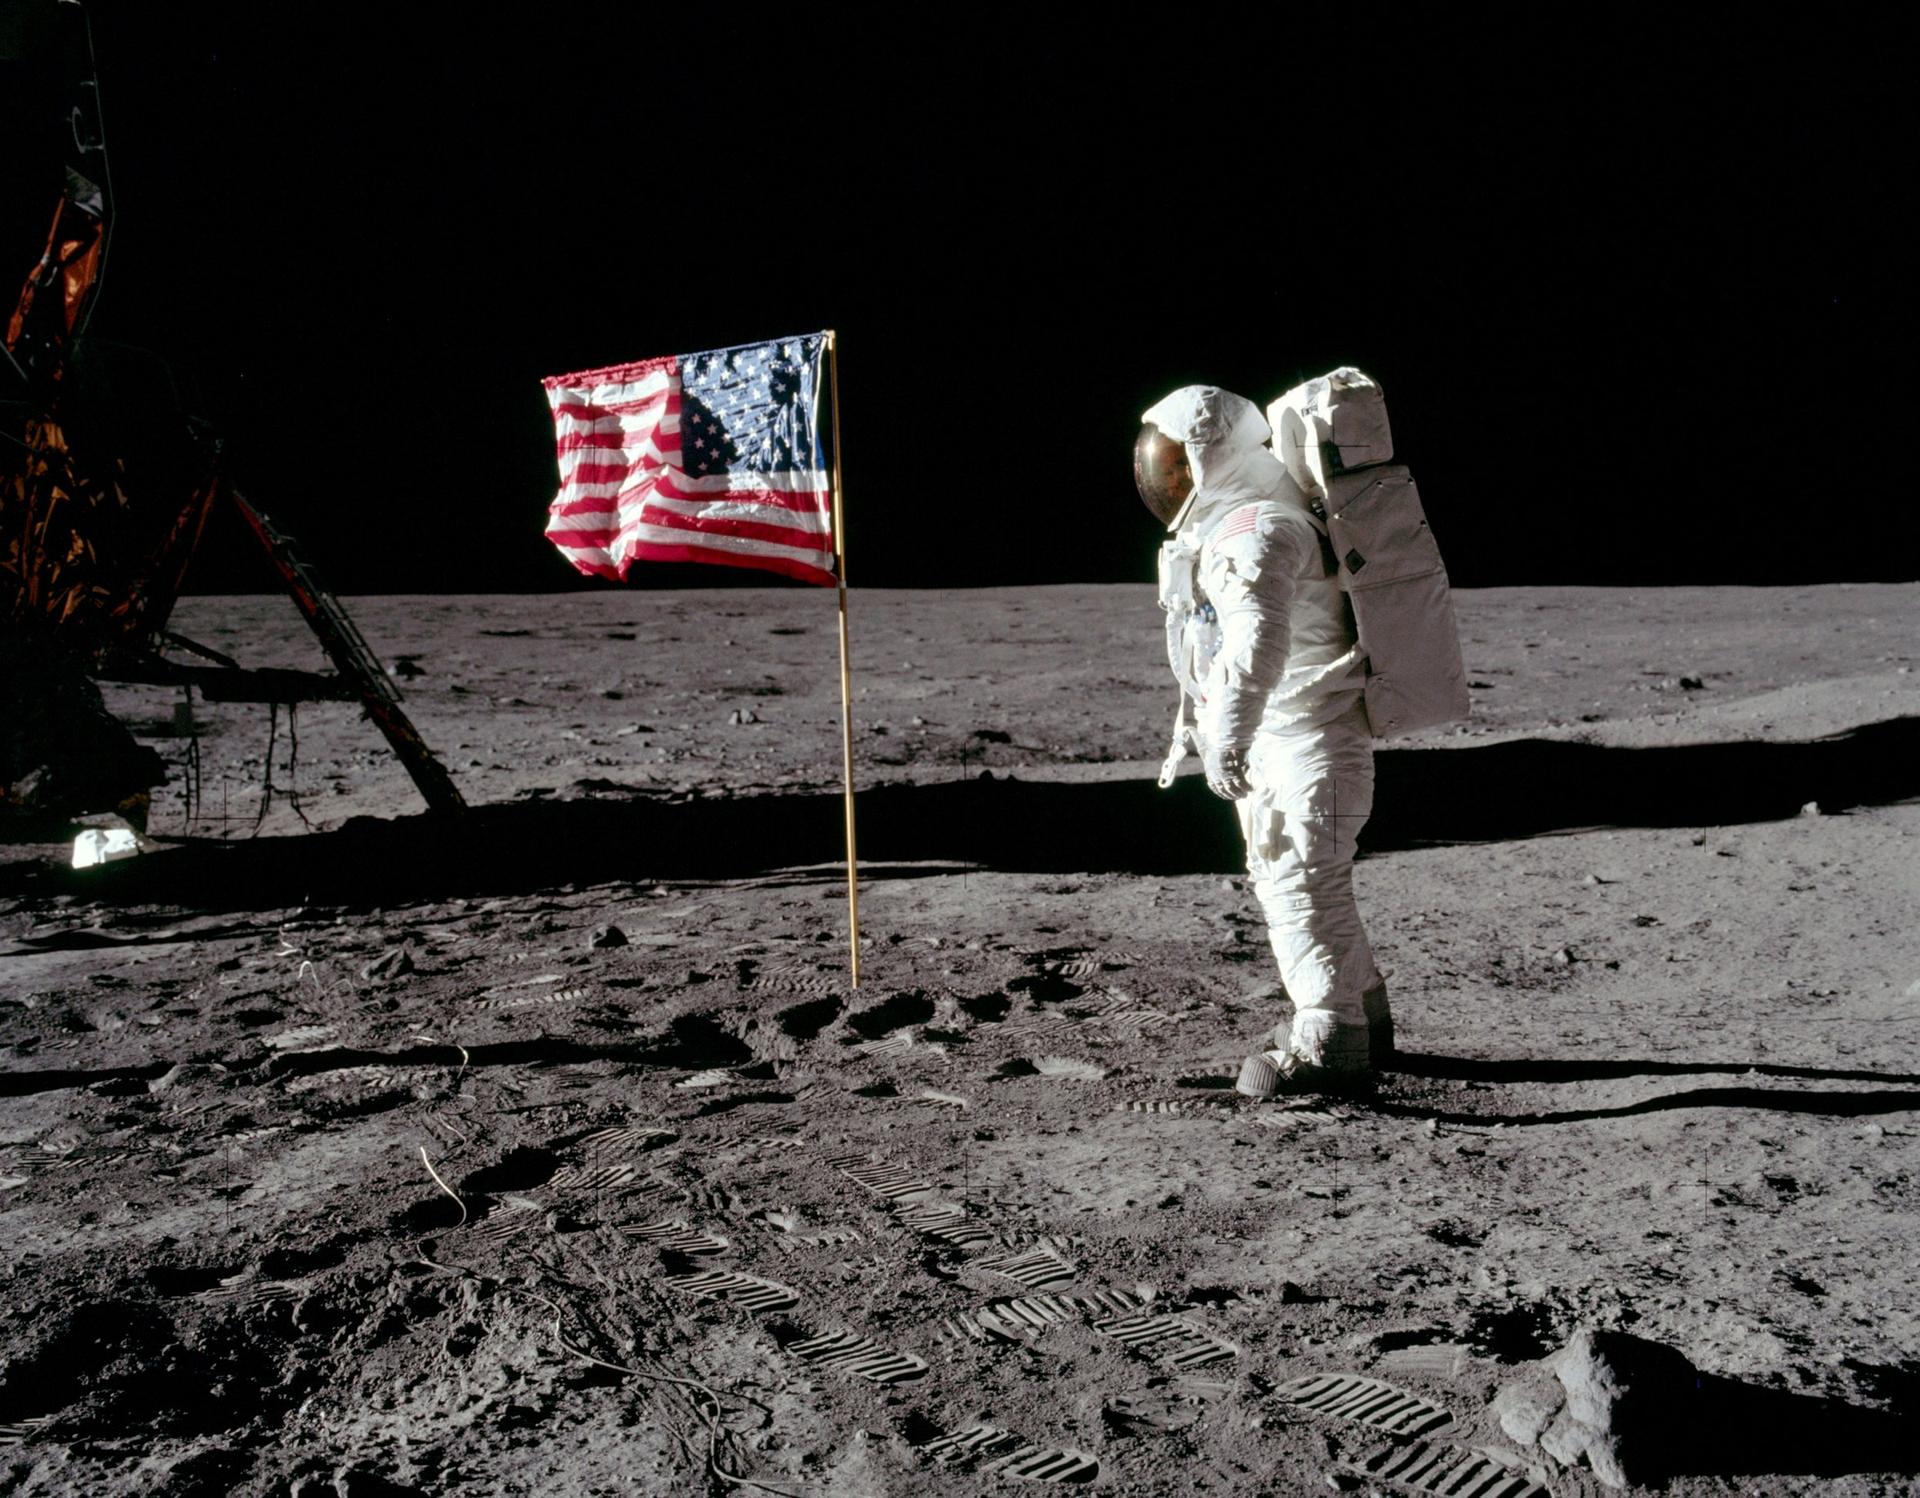 Buzz Aldrin stands in his full astronaut suit facing the United States flag.